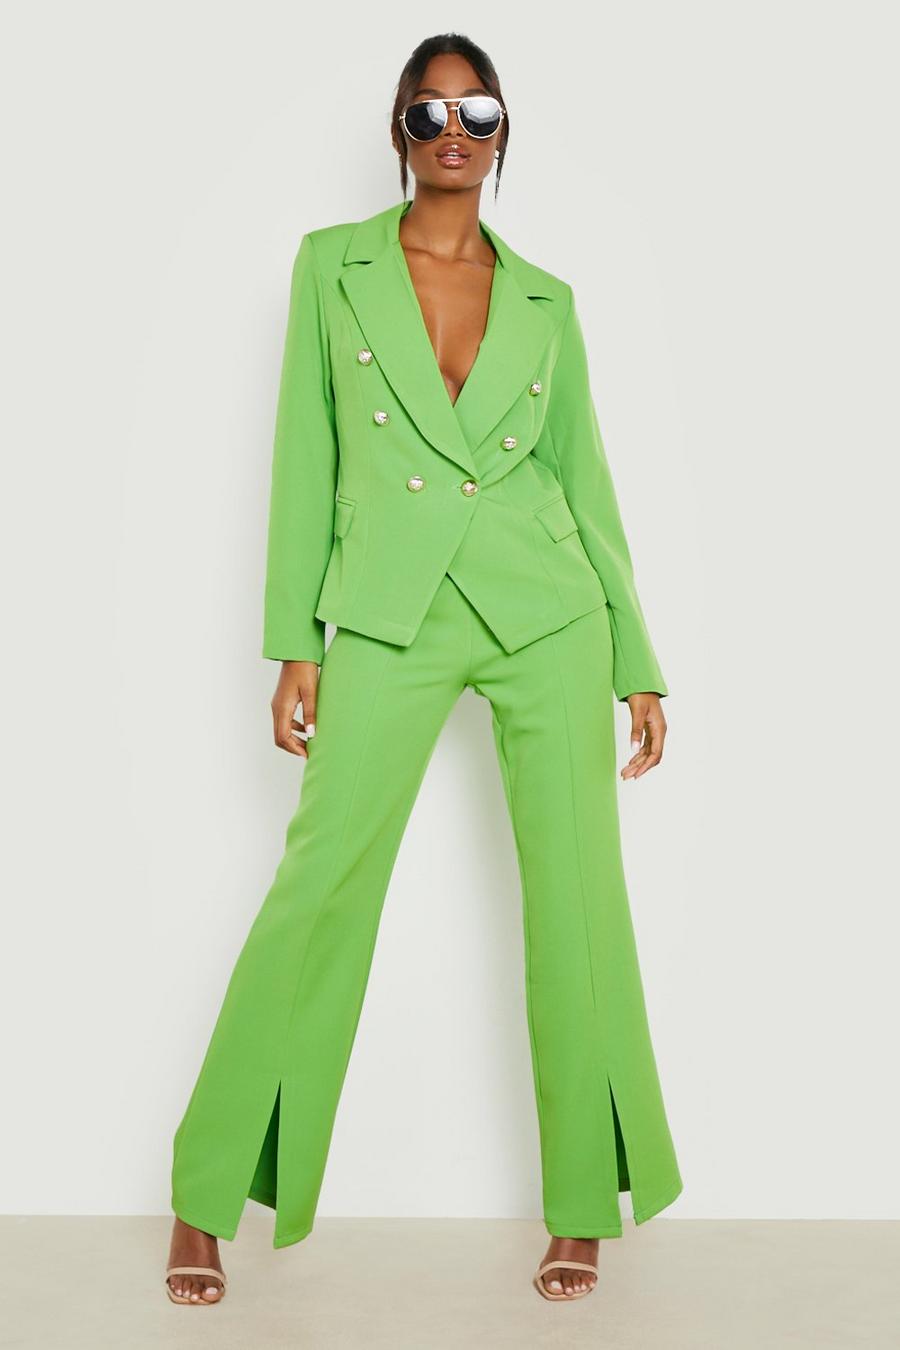 Wedding Guest Suits, Trouser Suits For Female Wedding Guests